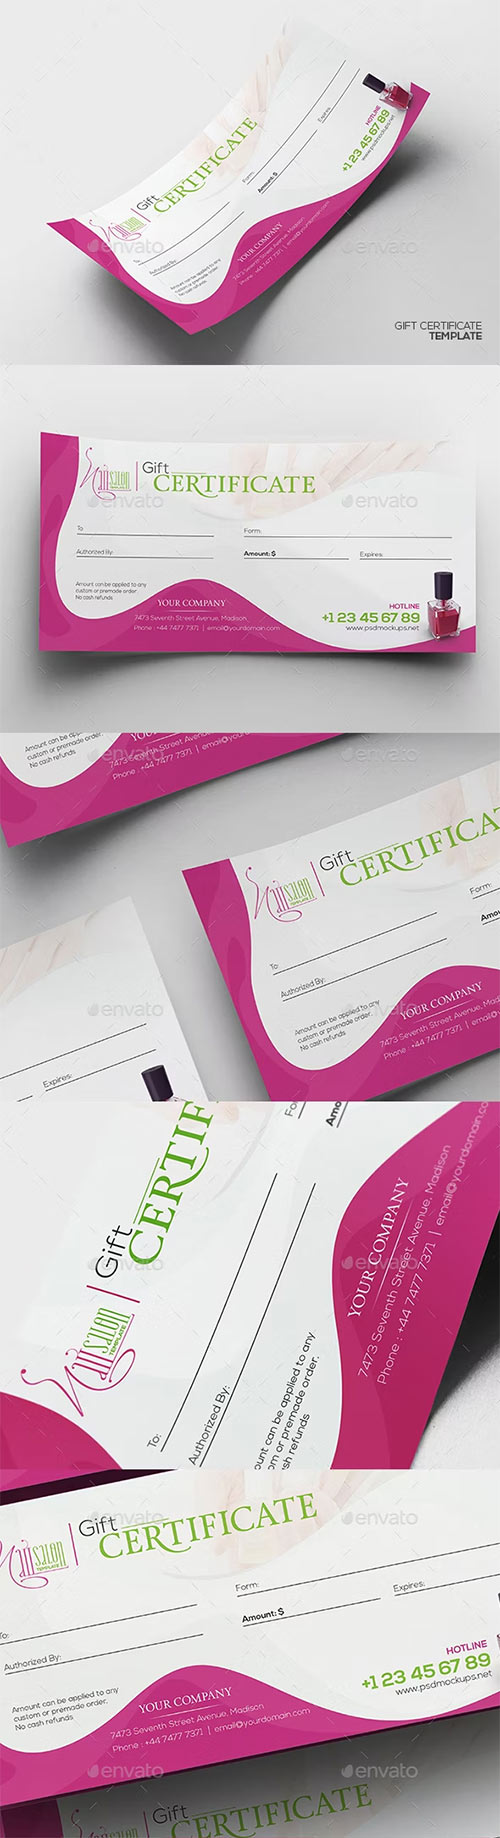 Nail Salon - Gift Certificate and Business Card Template 16150102